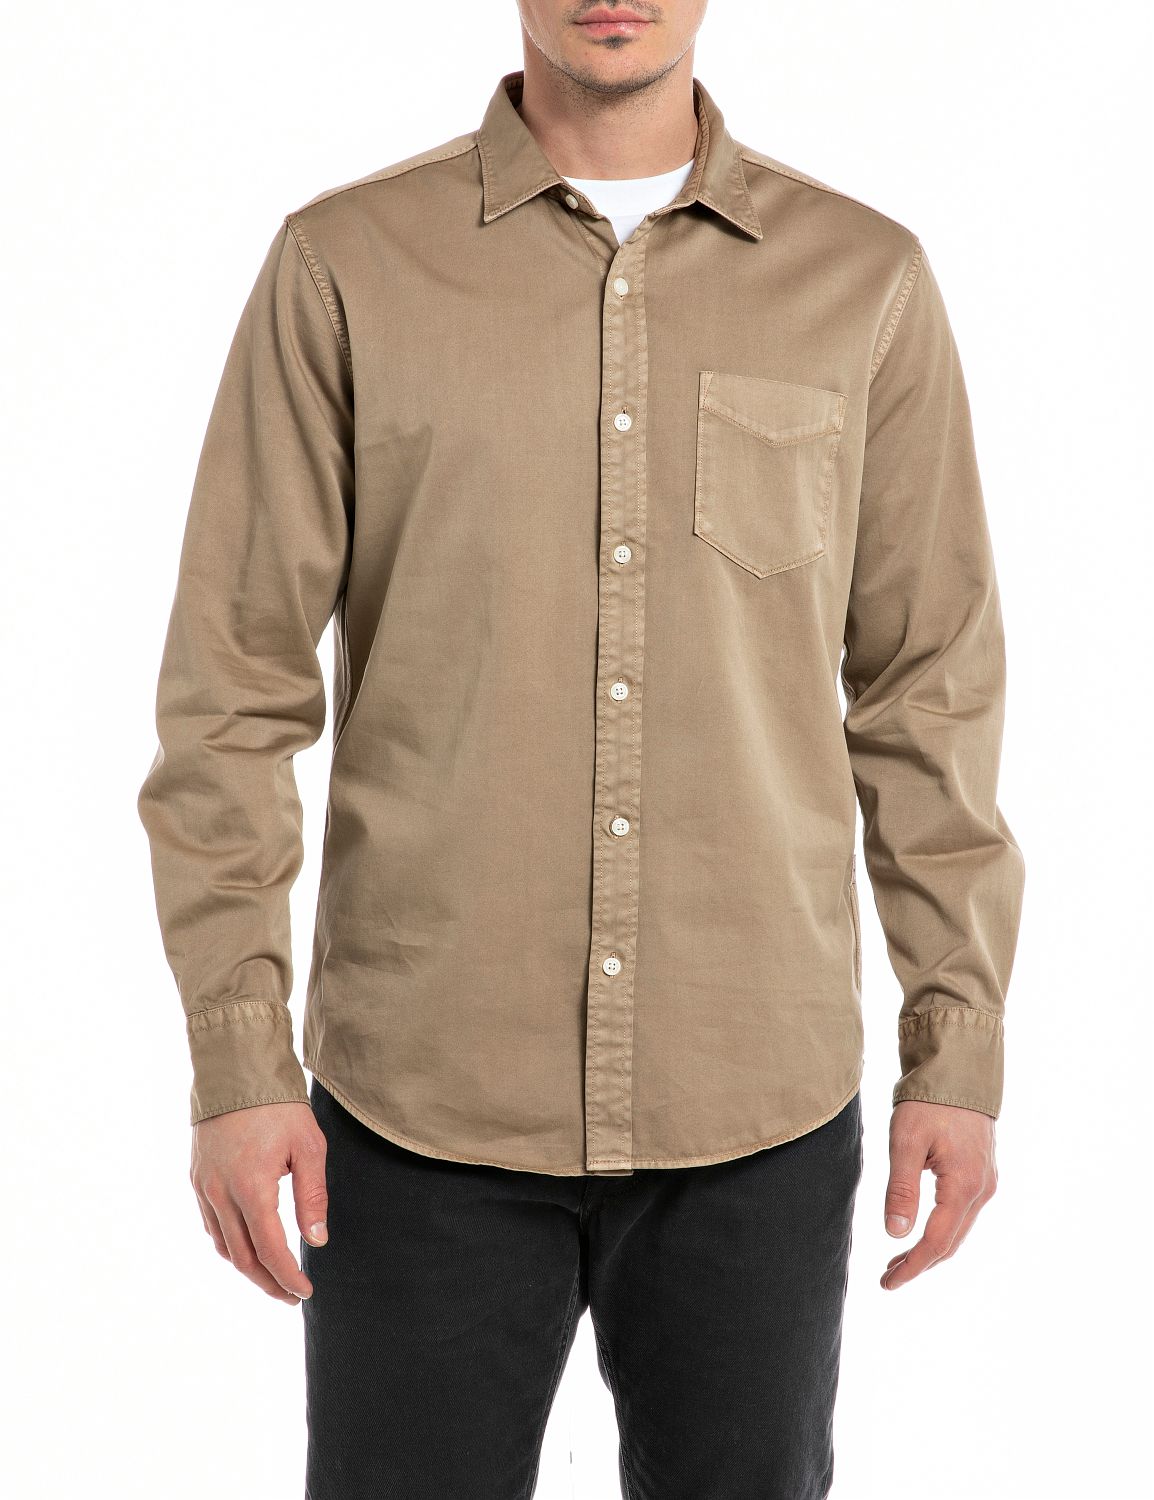 Twill Shirt with Pocket